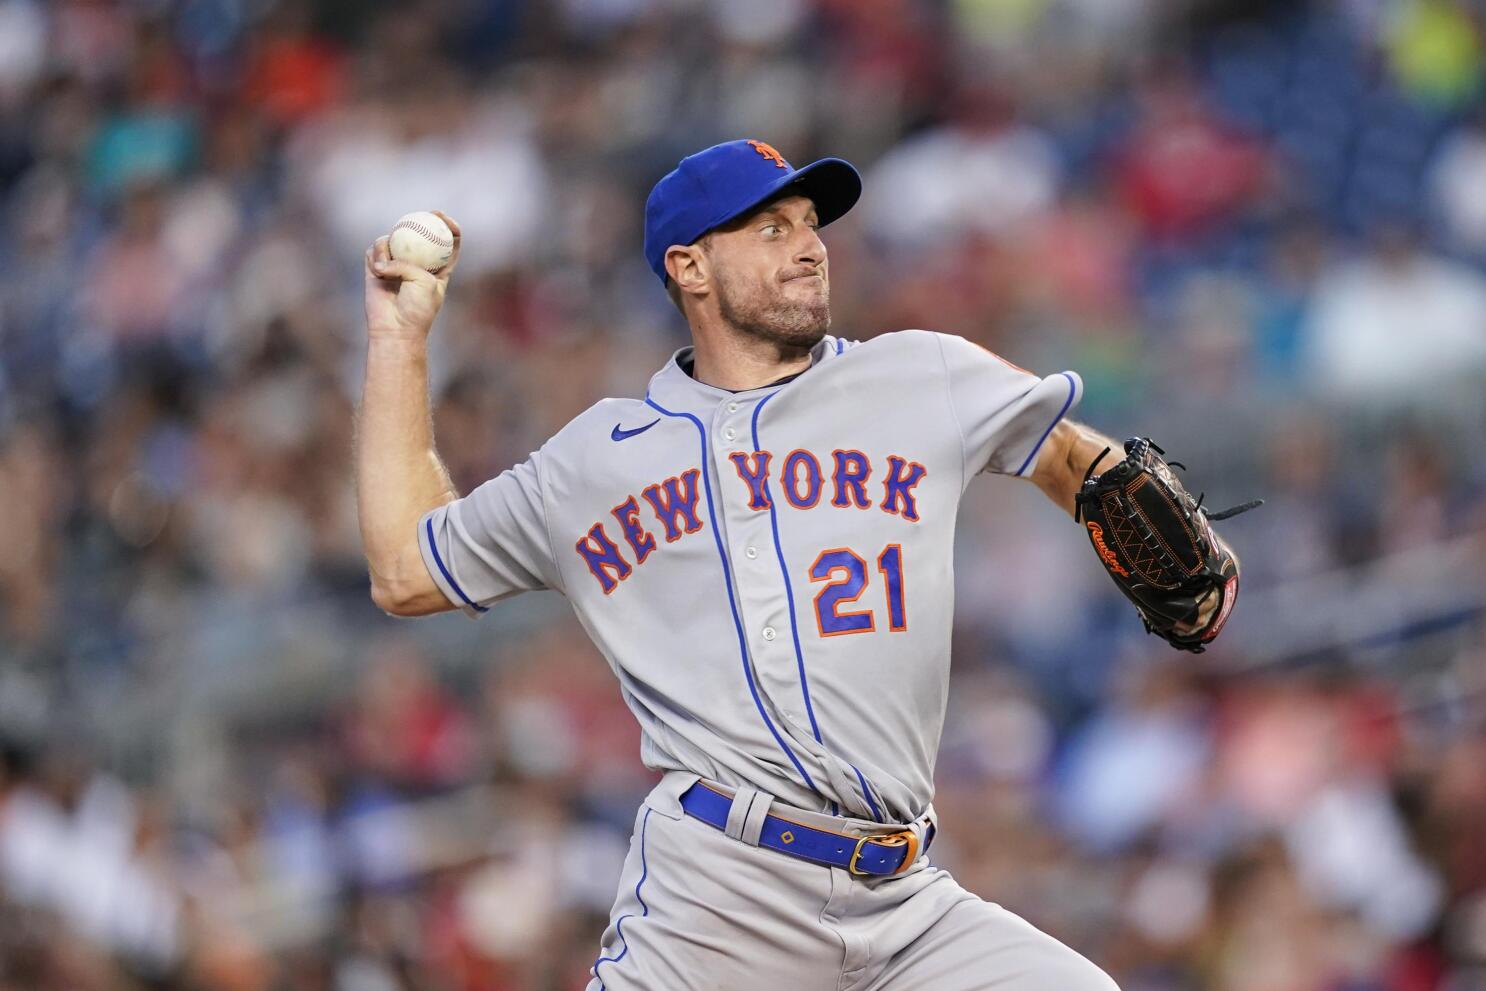 Drew Smith's first off night sinks Mets in loss to Mariners